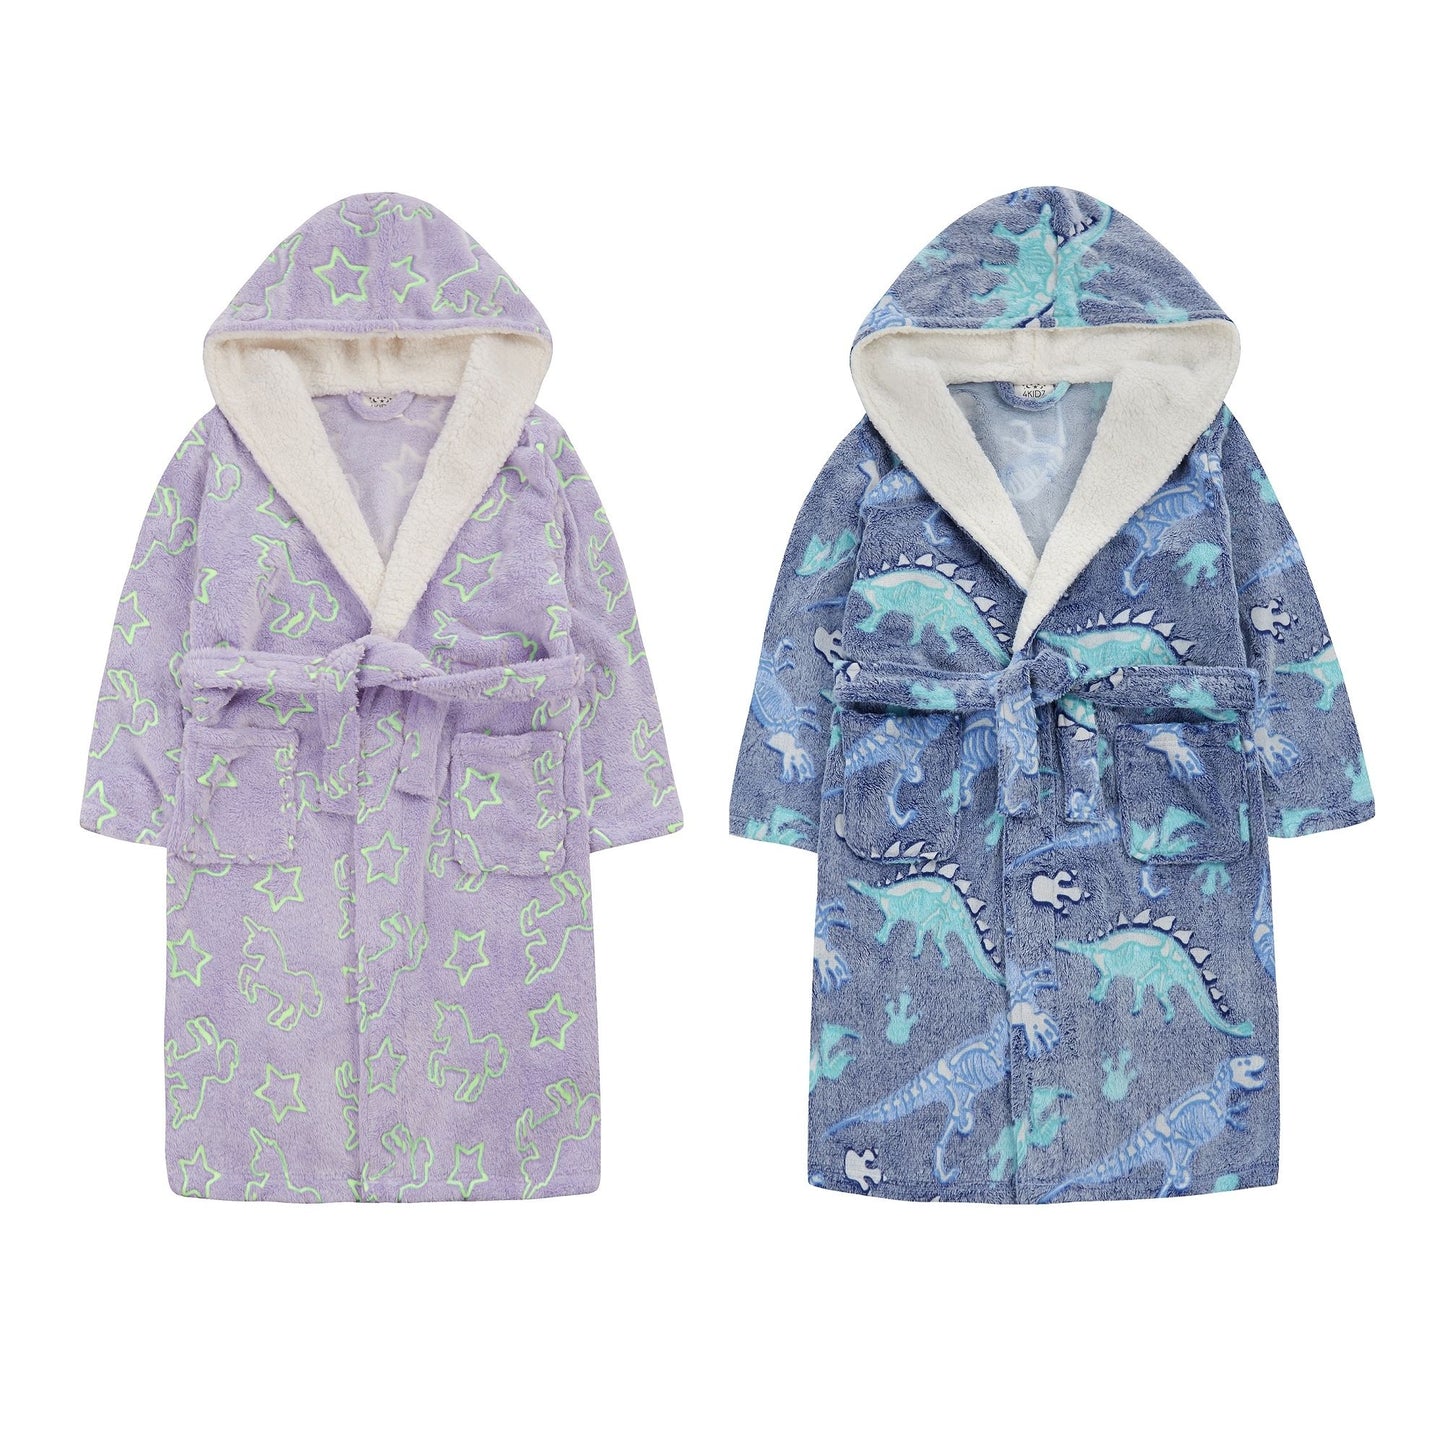 Childrens Glow In The Dark Dressing Gowns ~ Dinosaur or Unicorn ~ 2-13 Years